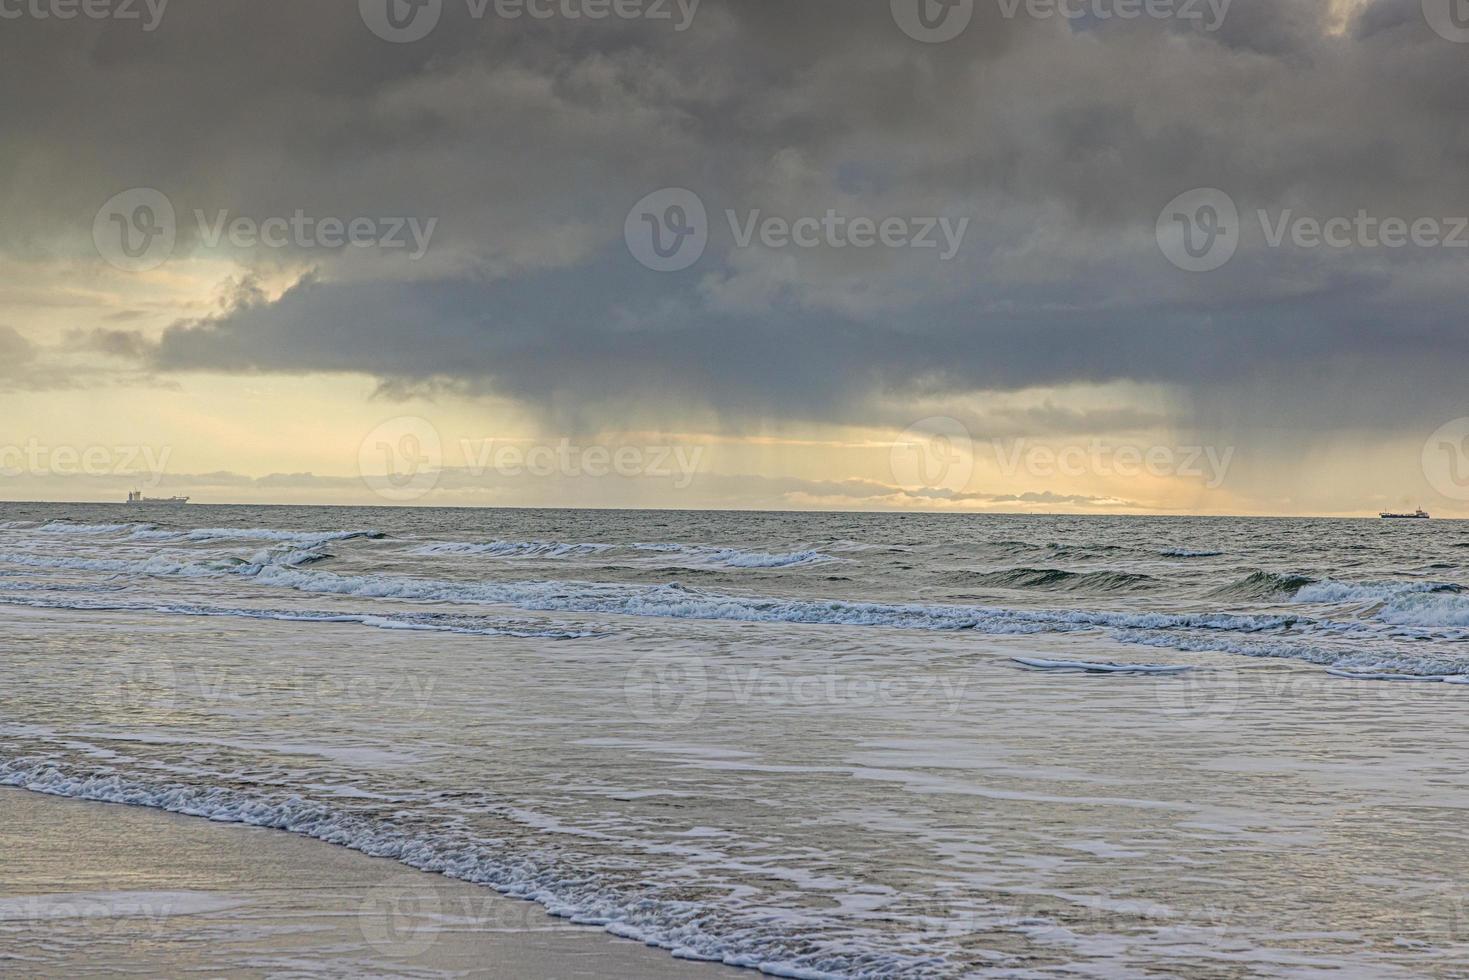 Picture of transport ship on stormy sea photographed from a beach photo